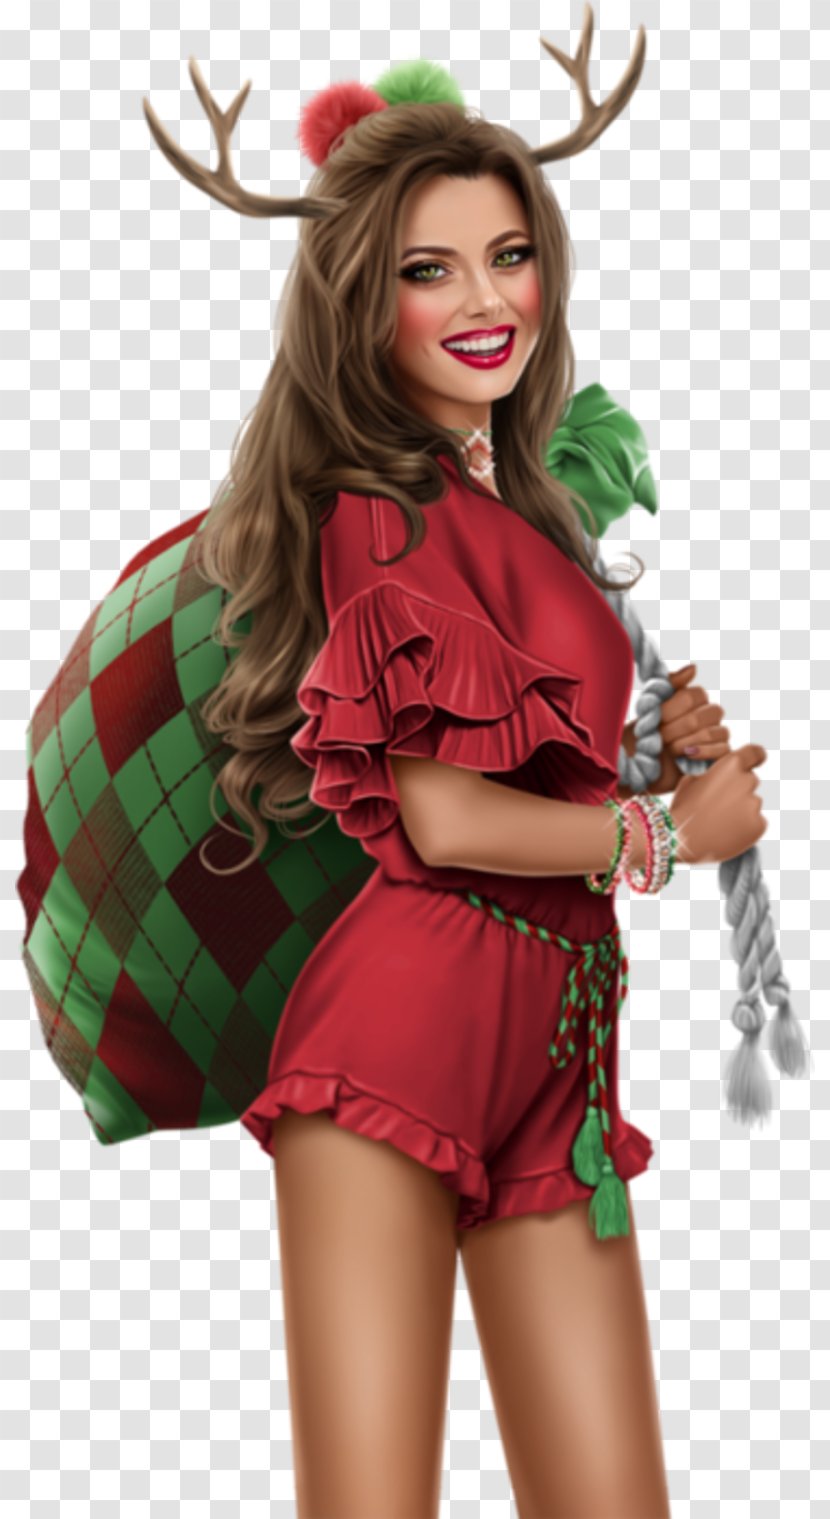 Christmas Design - Plaid - Style Costume Accessory Transparent PNG